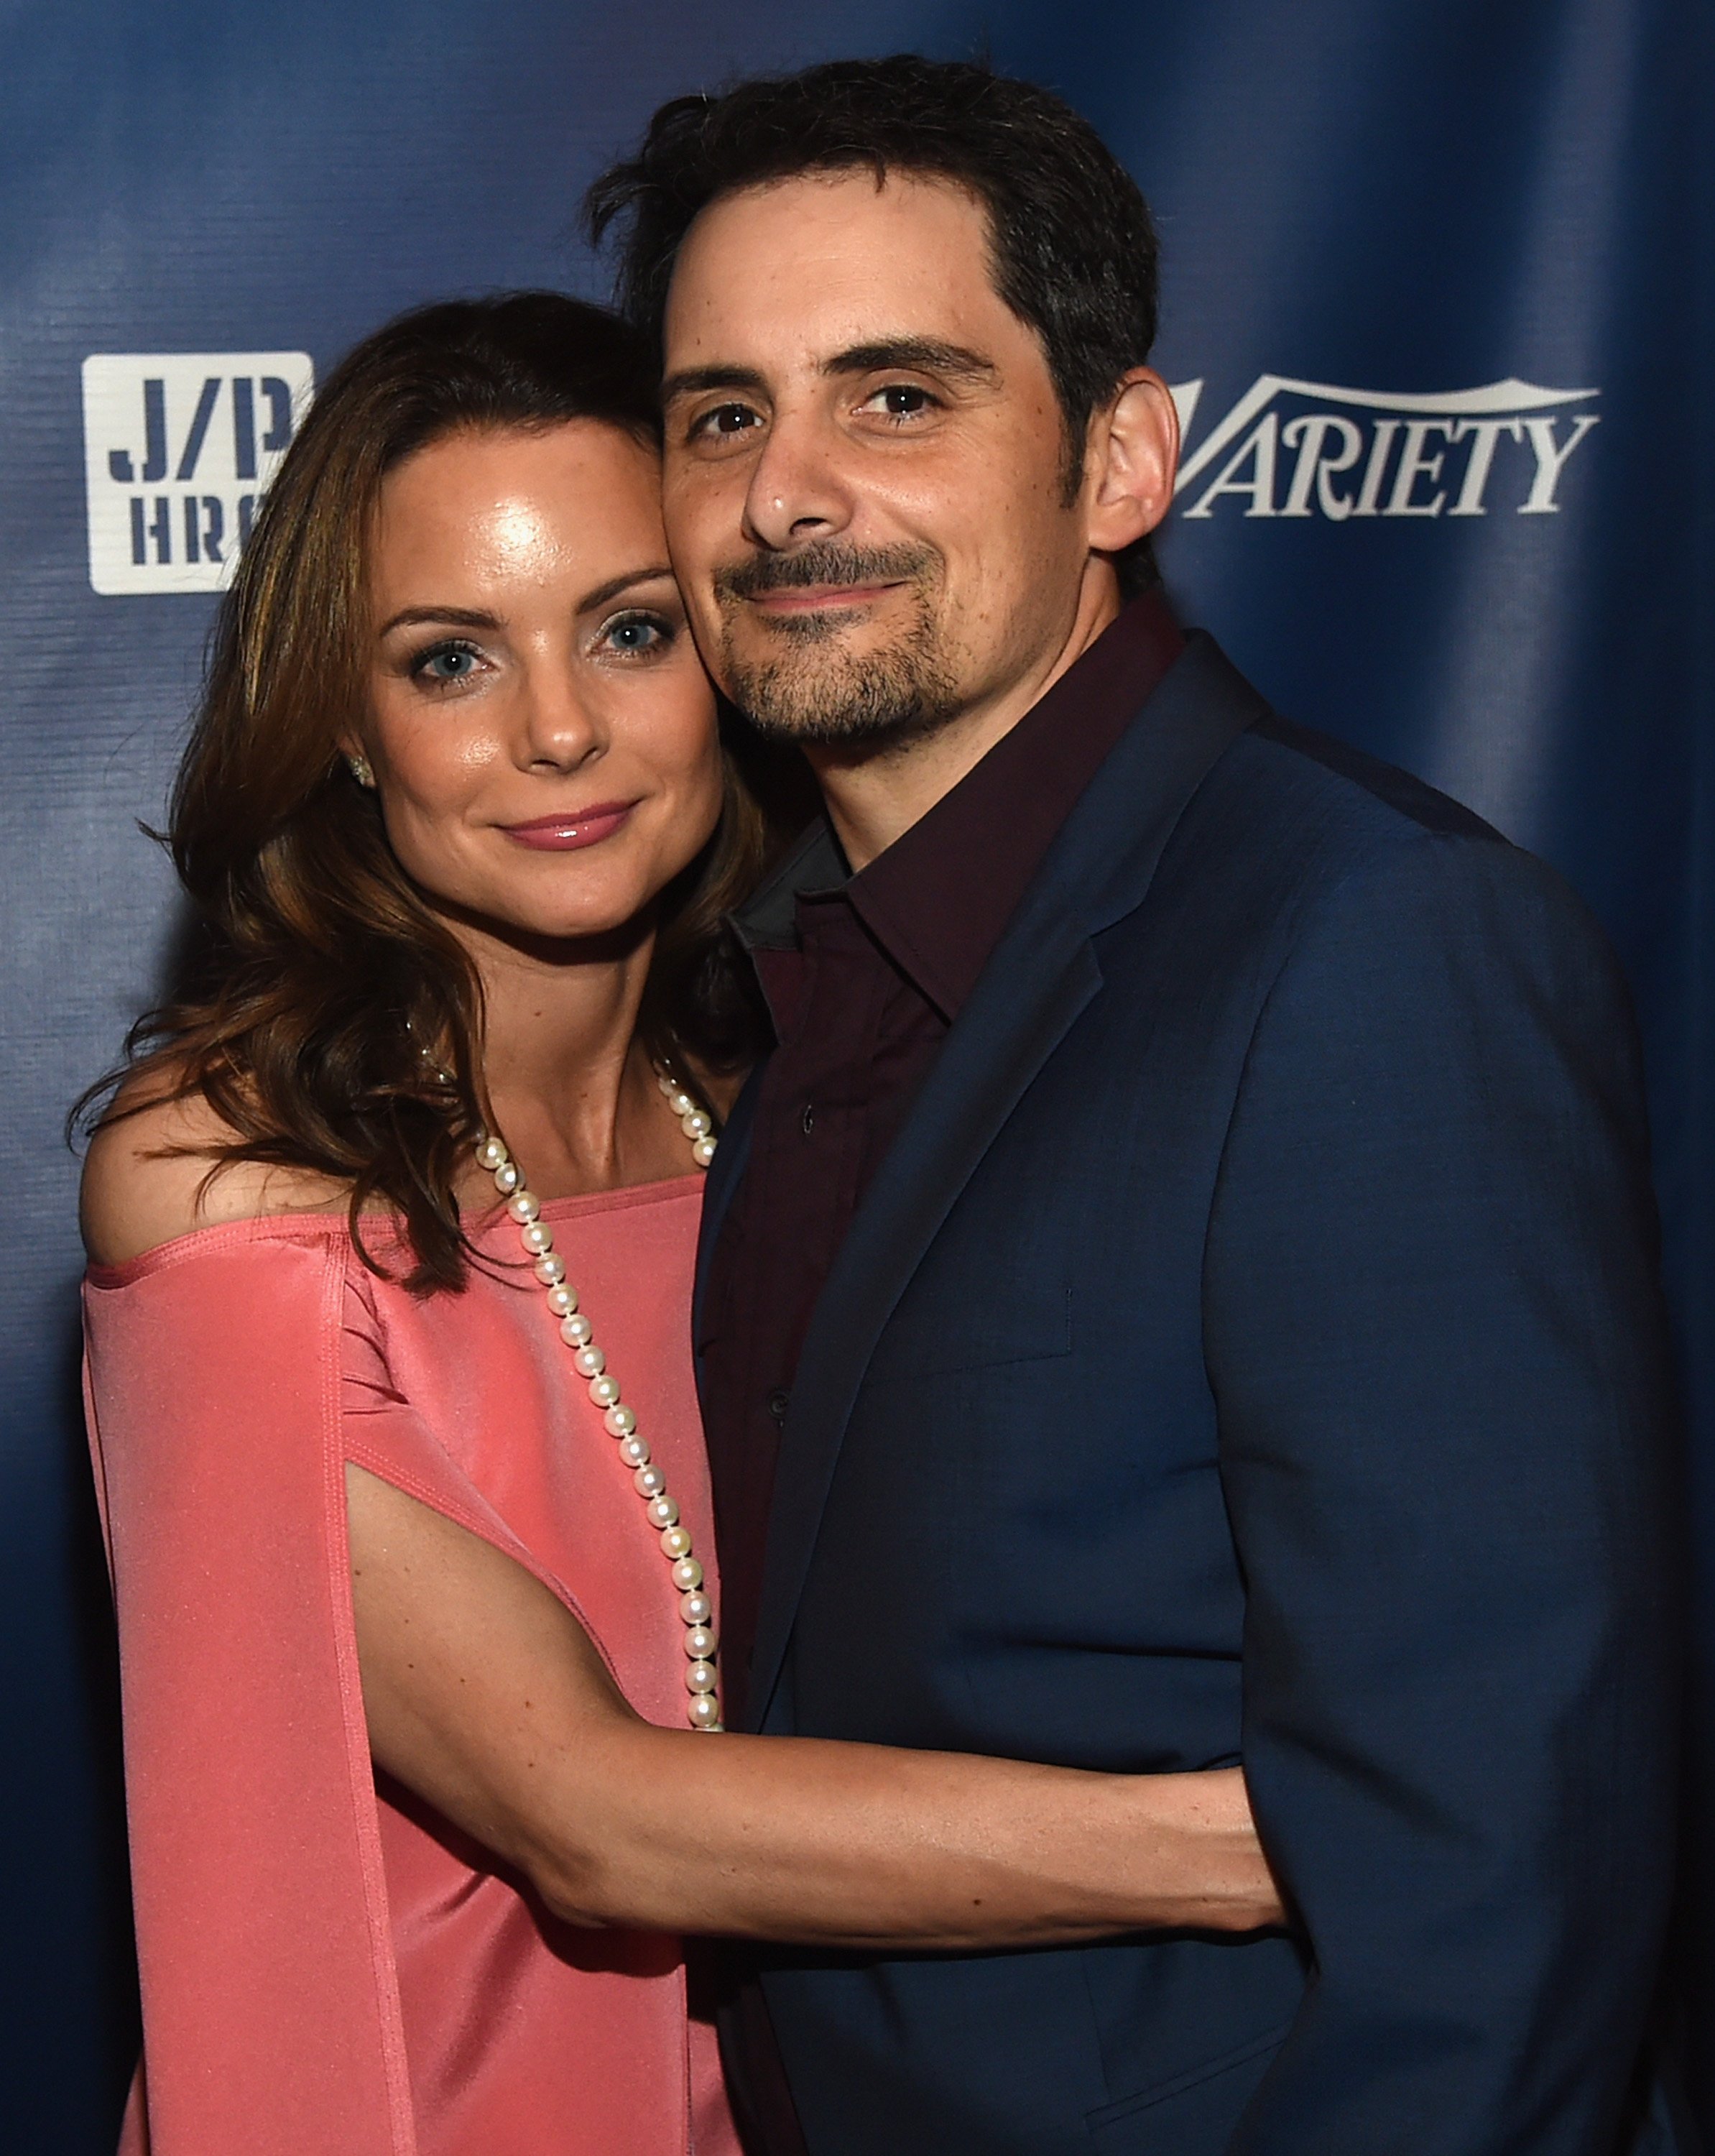 Brad Paisley and wife, Kimberly Williams-Paisley, at a benefit concert for the Haitian Relief Organization. | Photo: Getty Images.